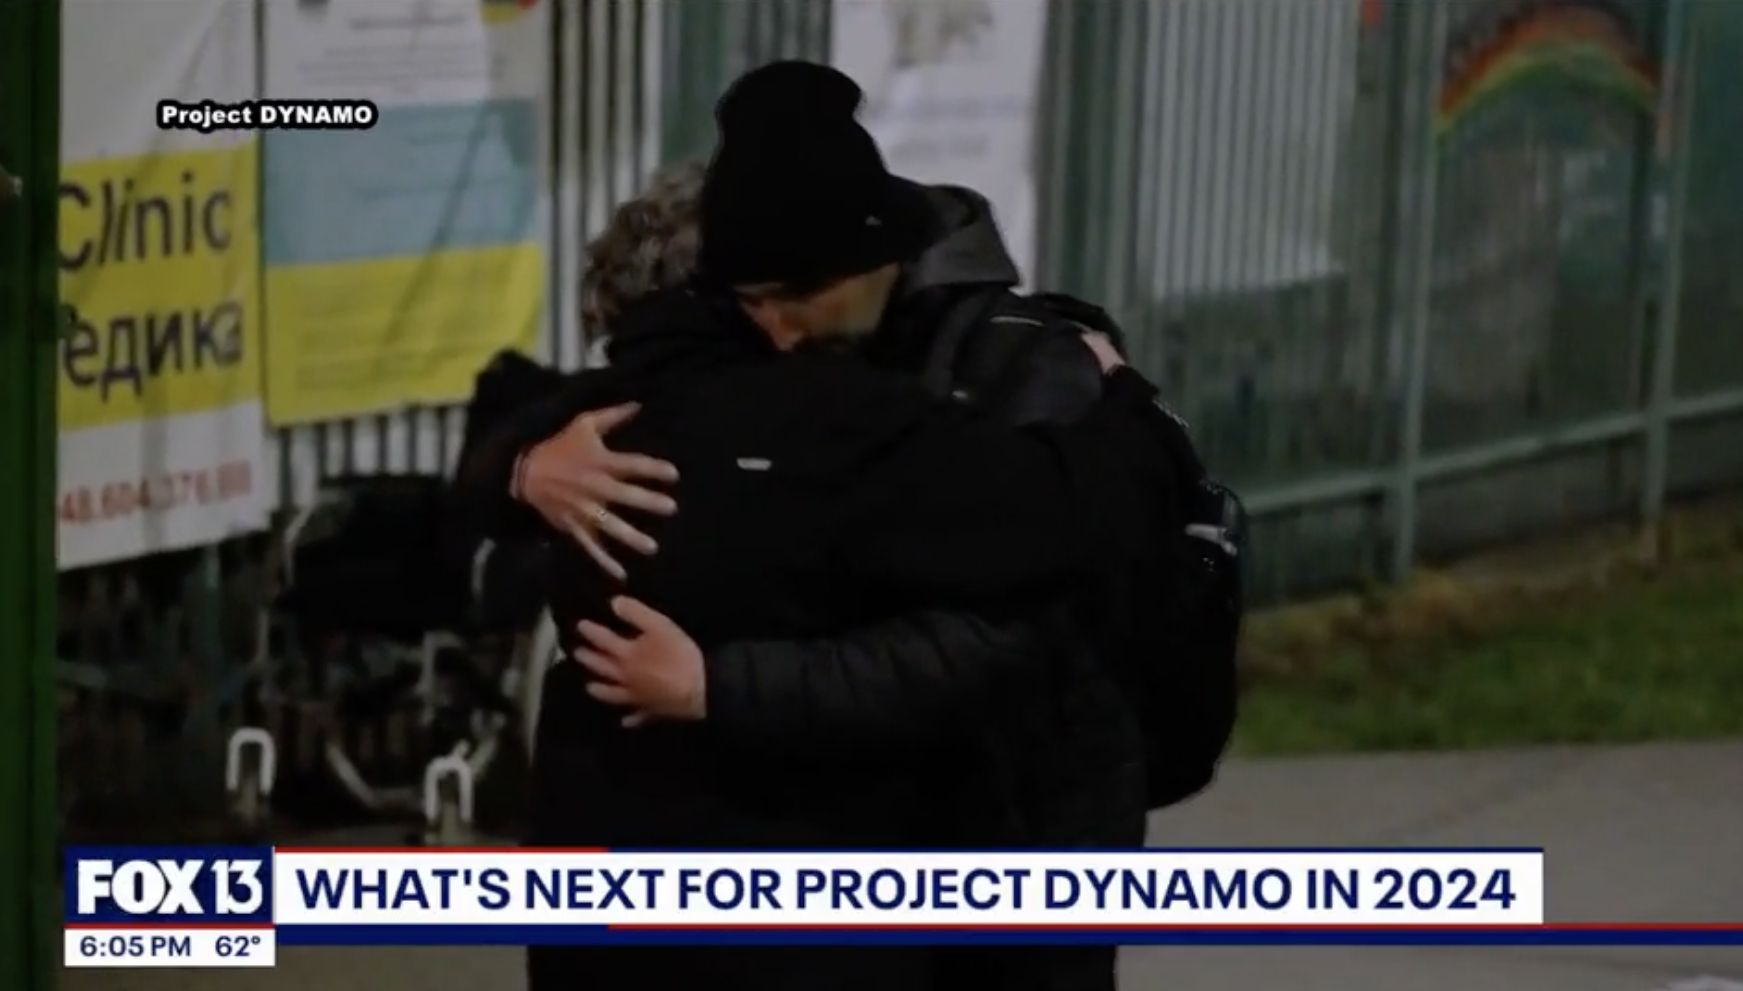 FOX News- Project Dynamo founder reflects on eventful 2023, looks ahead to 2024